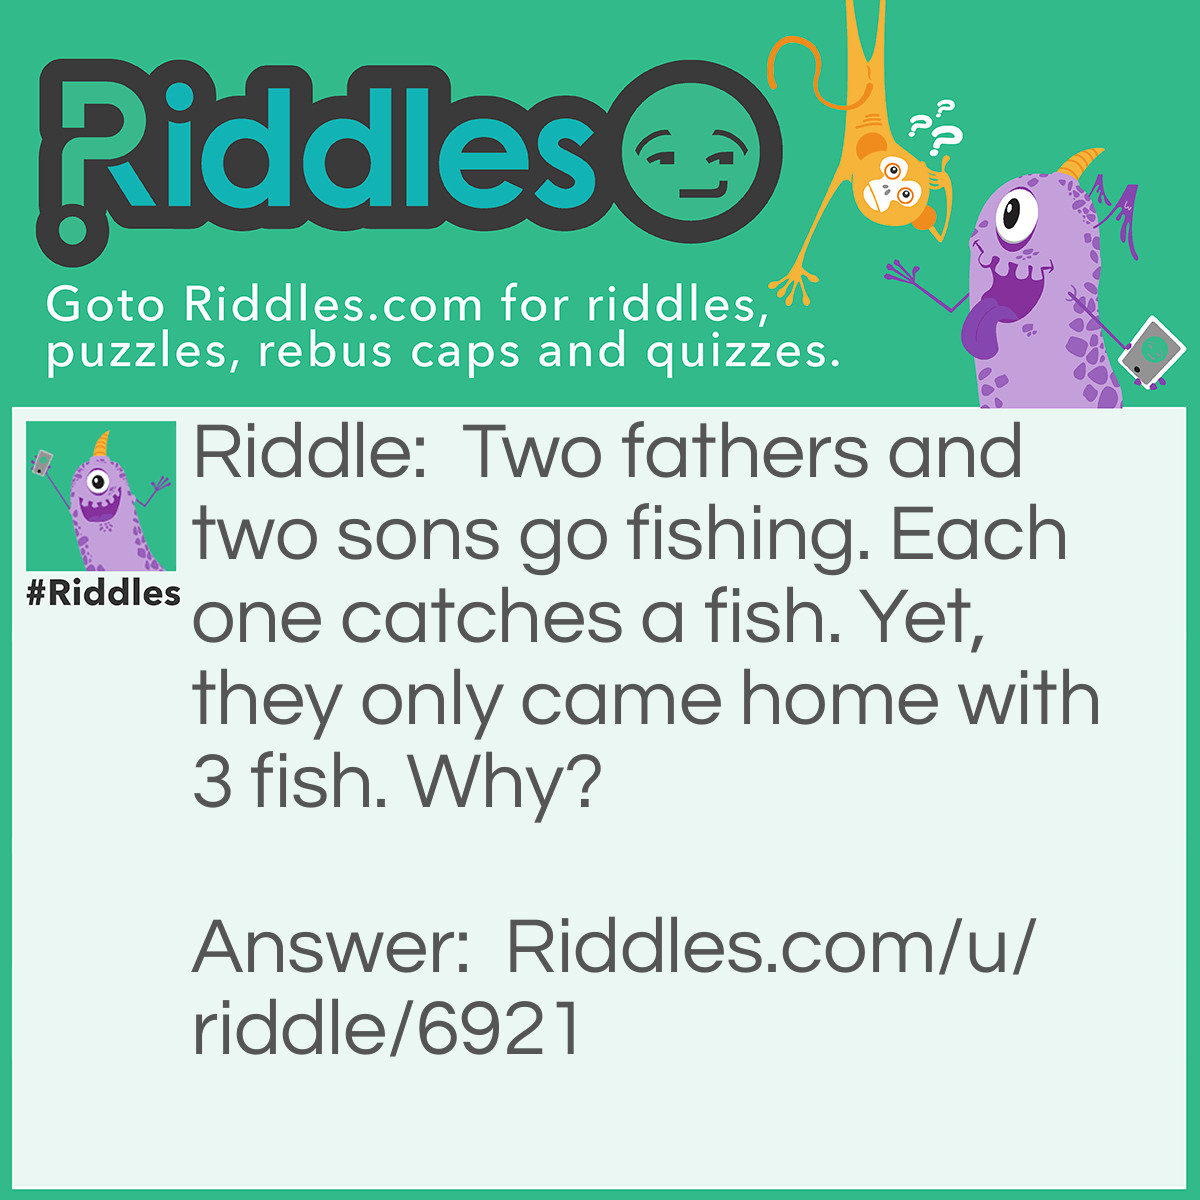 Riddle: Two fathers and two sons go fishing. Each one catches a fish. Yet, they only came home with 3 fish. Why? Answer: A son, his father and the grandfather went fishing. The father and the grandfather are both dads. The son and the father are both sons.